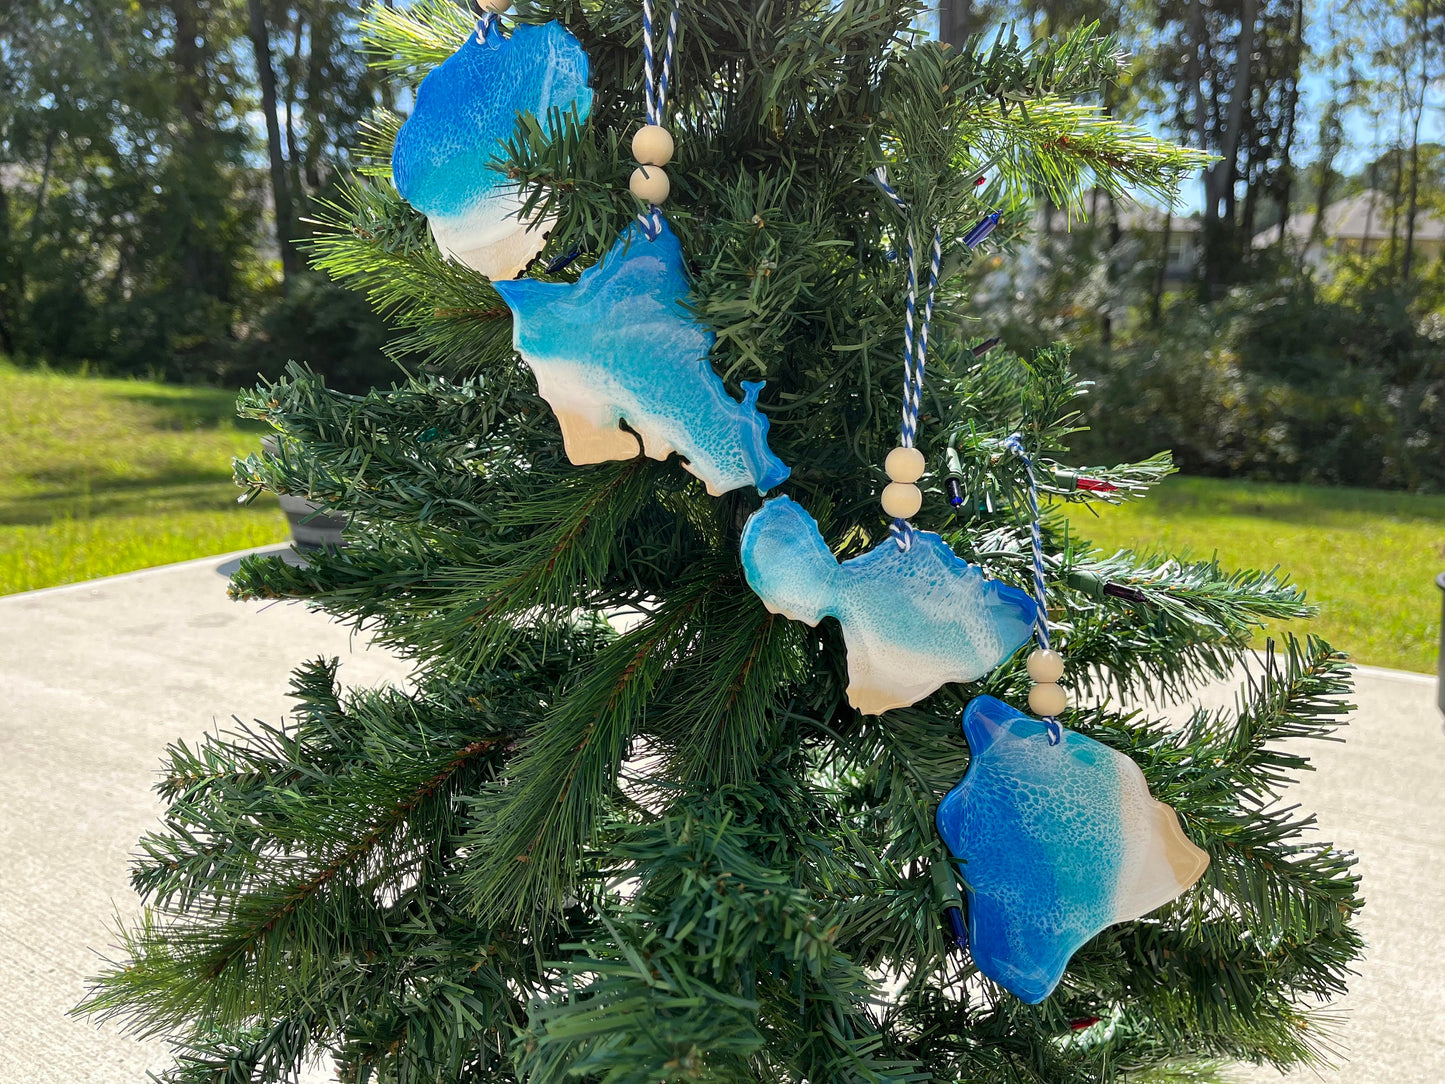 Hawaiian Island Ornaments with ocean resin art and hanging on a christmas tree.